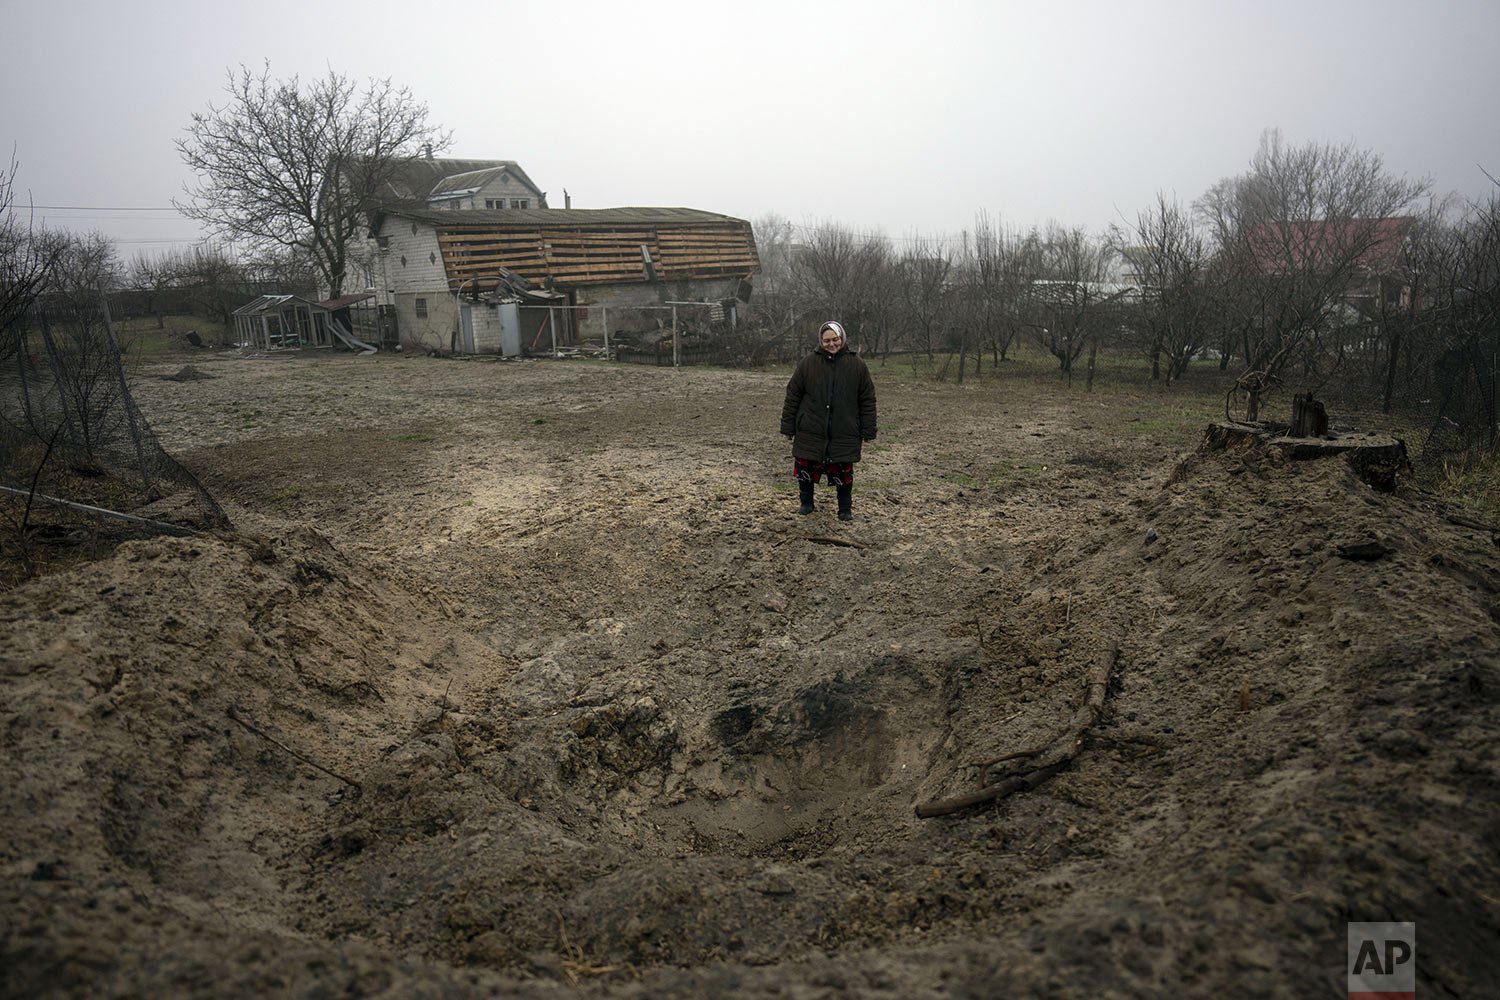  Zina, 65, stands next to a crater created after a bomb hit the ground behind her house on the outskirts of Kyiv, Ukraine, Friday, April 1, 2022. (AP Photo/Rodrigo Abd) 